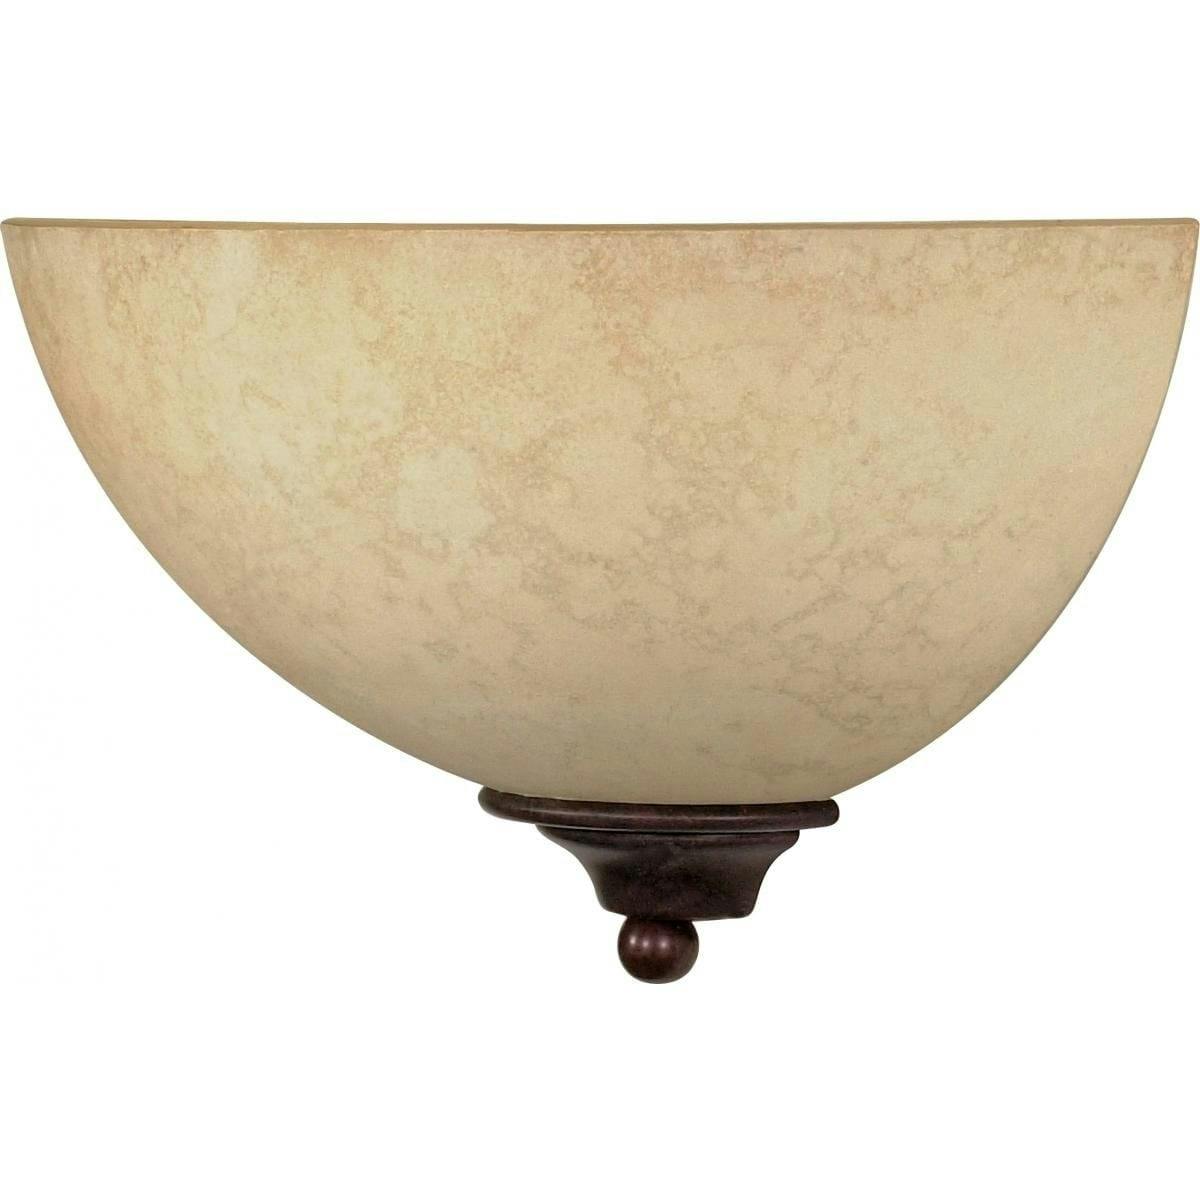 Old Bronze Tuscan Suede Glass Wall Sconce, 7x12 Inches